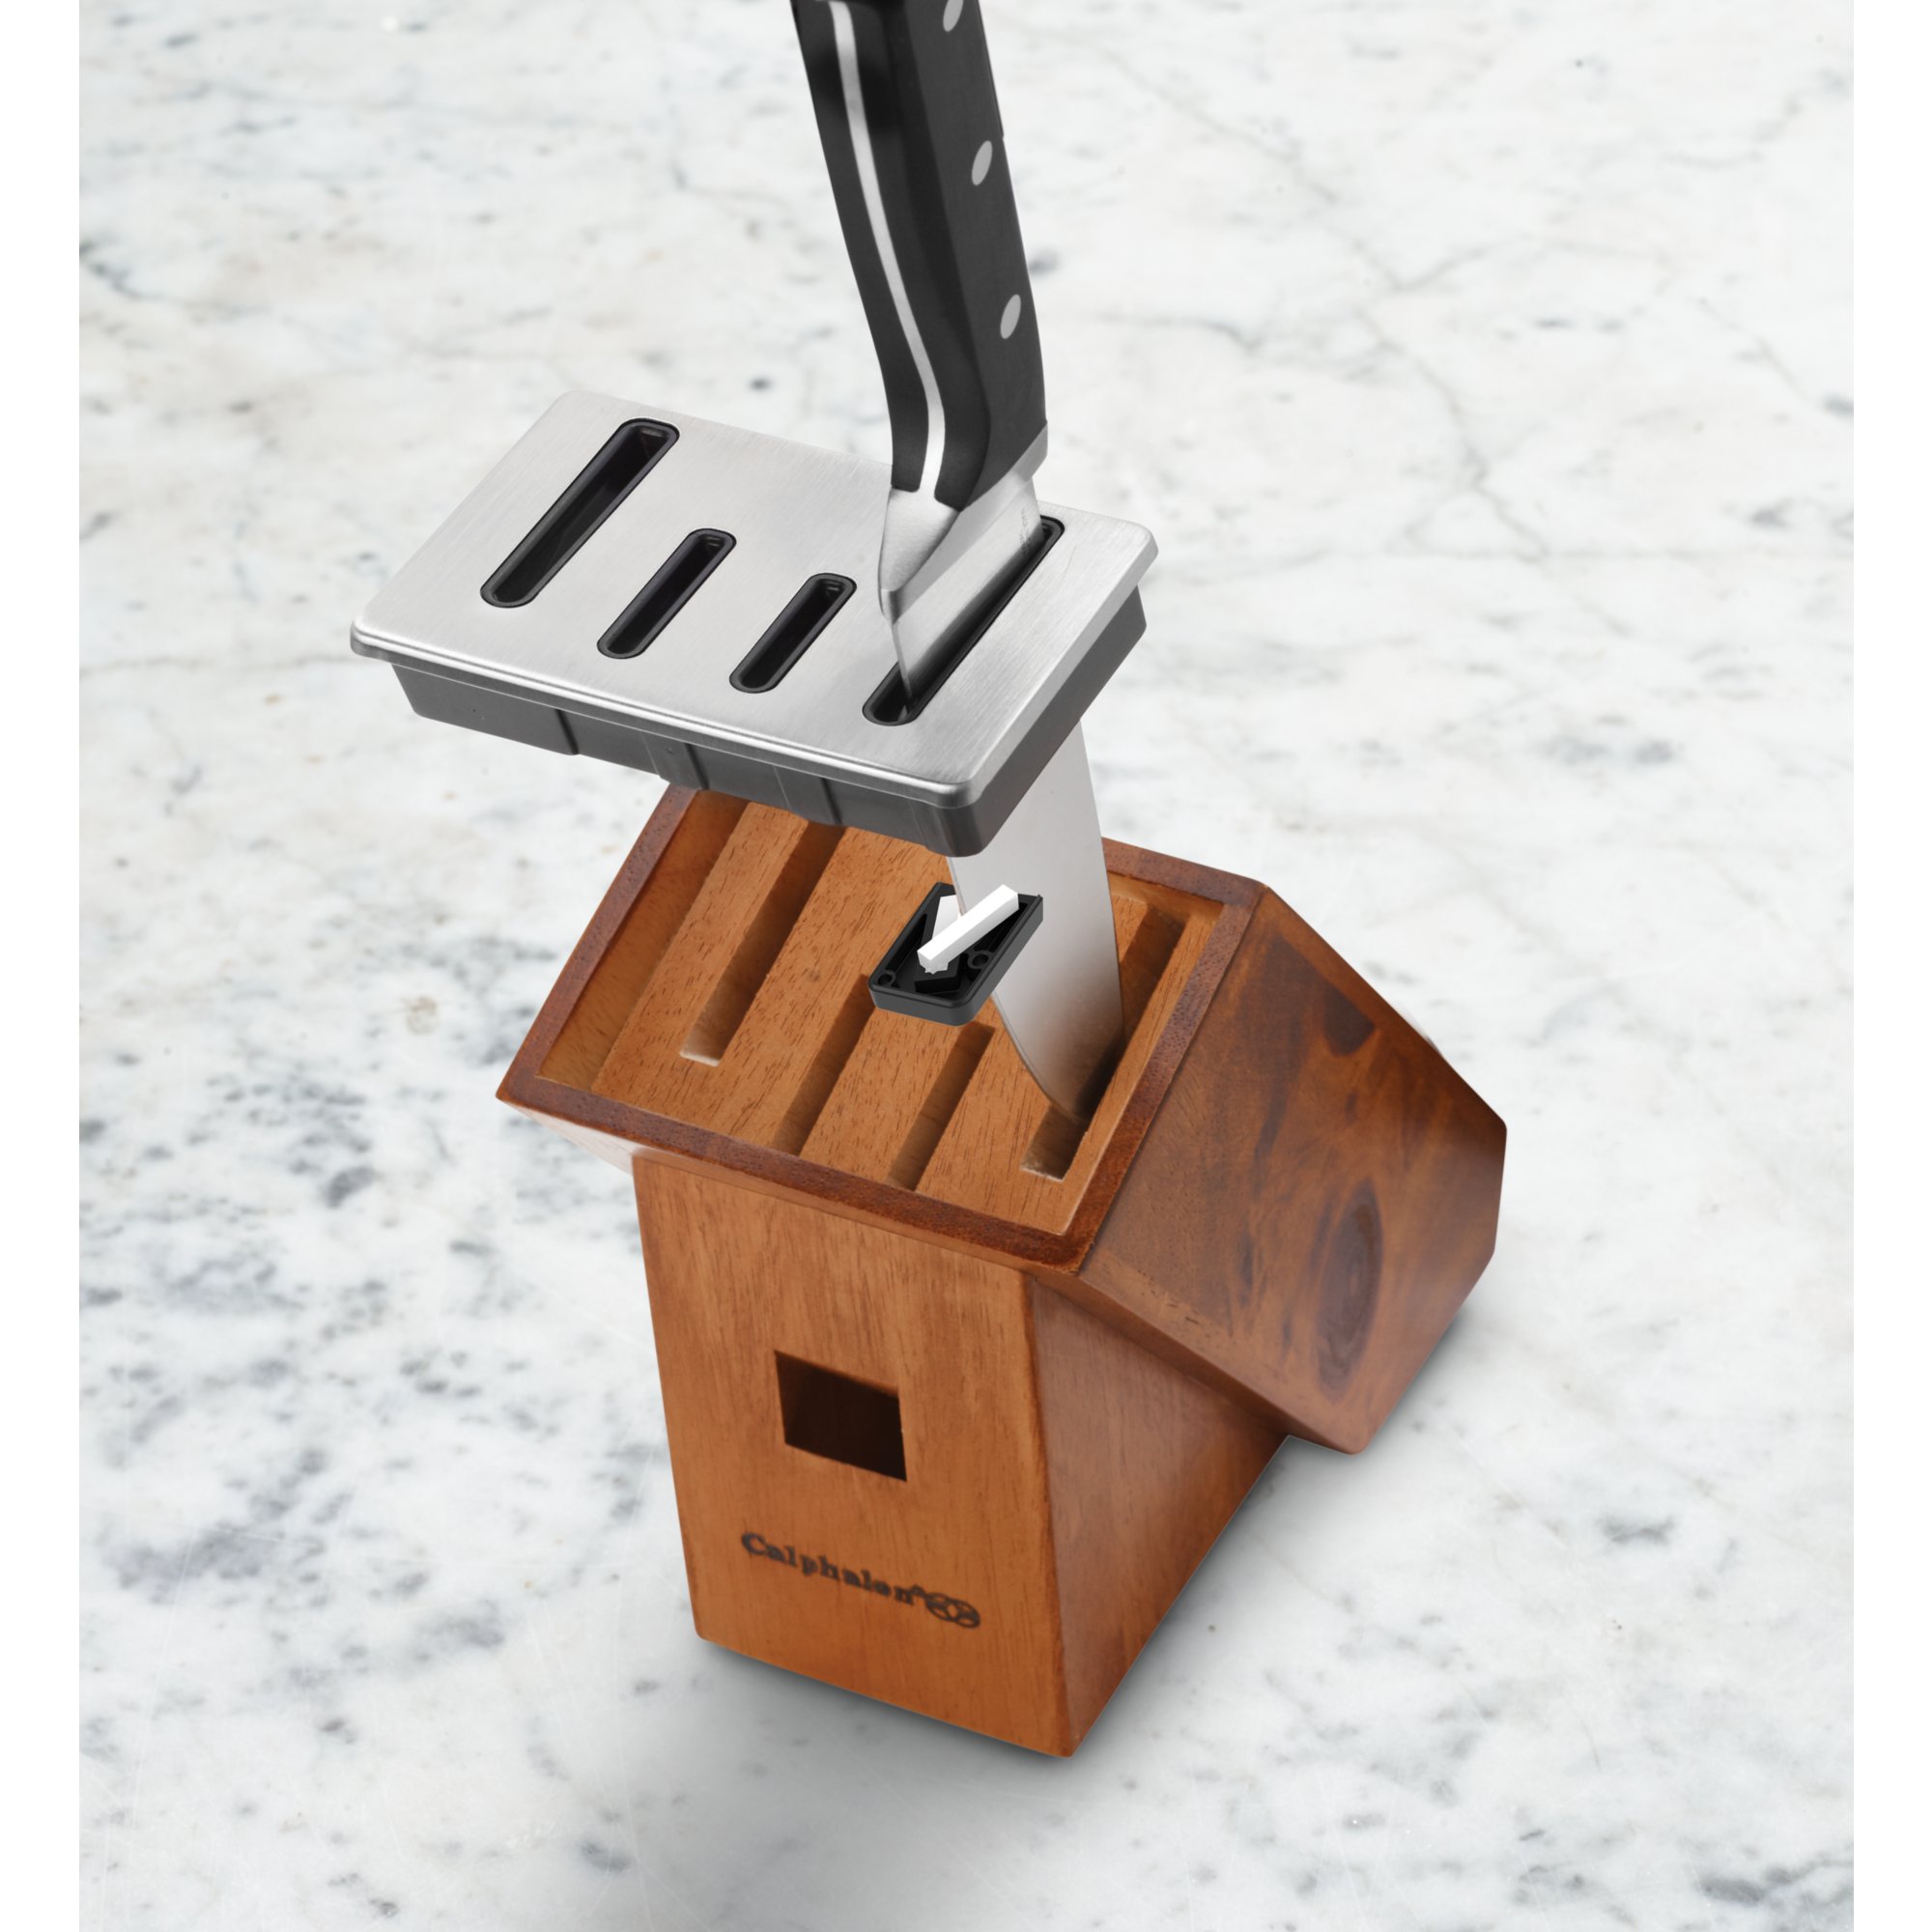 Williams Sonoma Calphalon Contemporary Self-Sharpening Knife Block with  SharpIN Tehcnology, Set of 15